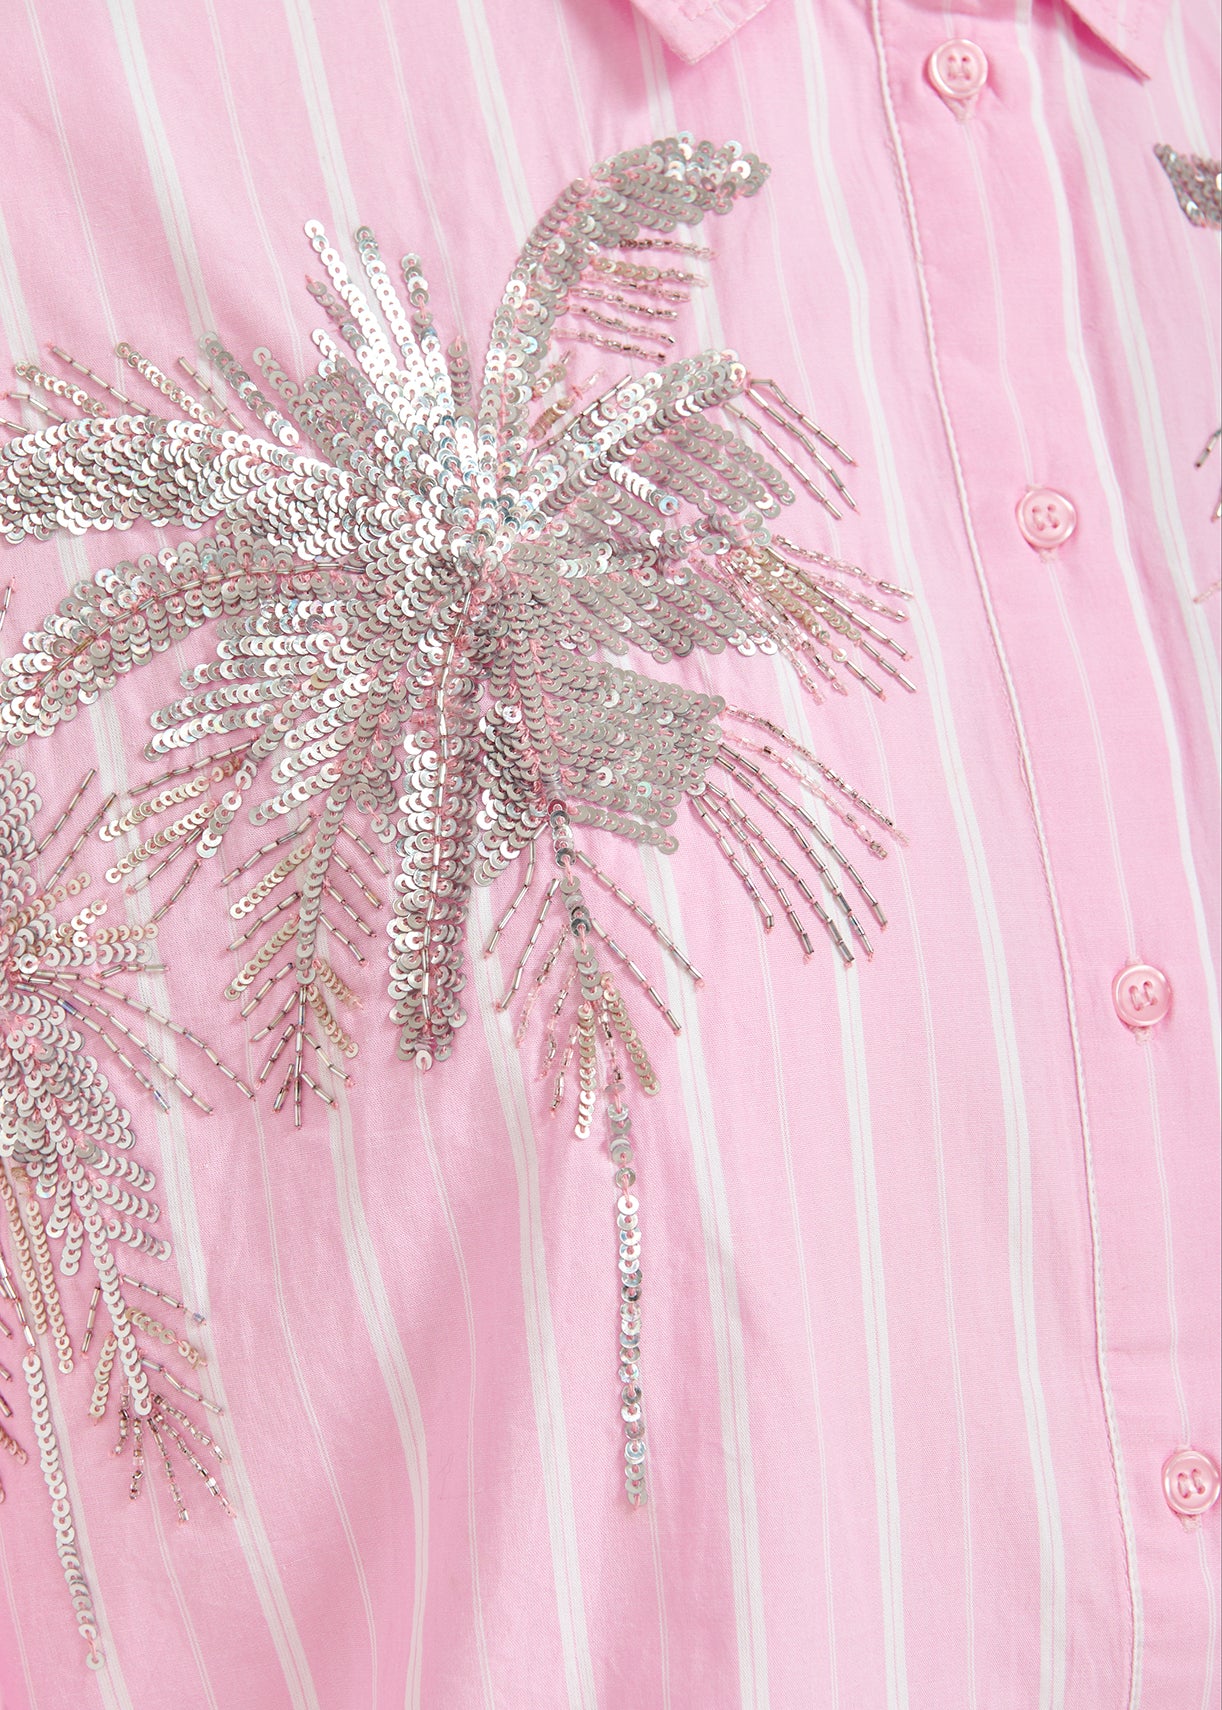 Close-up of a Essentiel Antwerp Fresh Shirt - Pink with silver sequin detail.